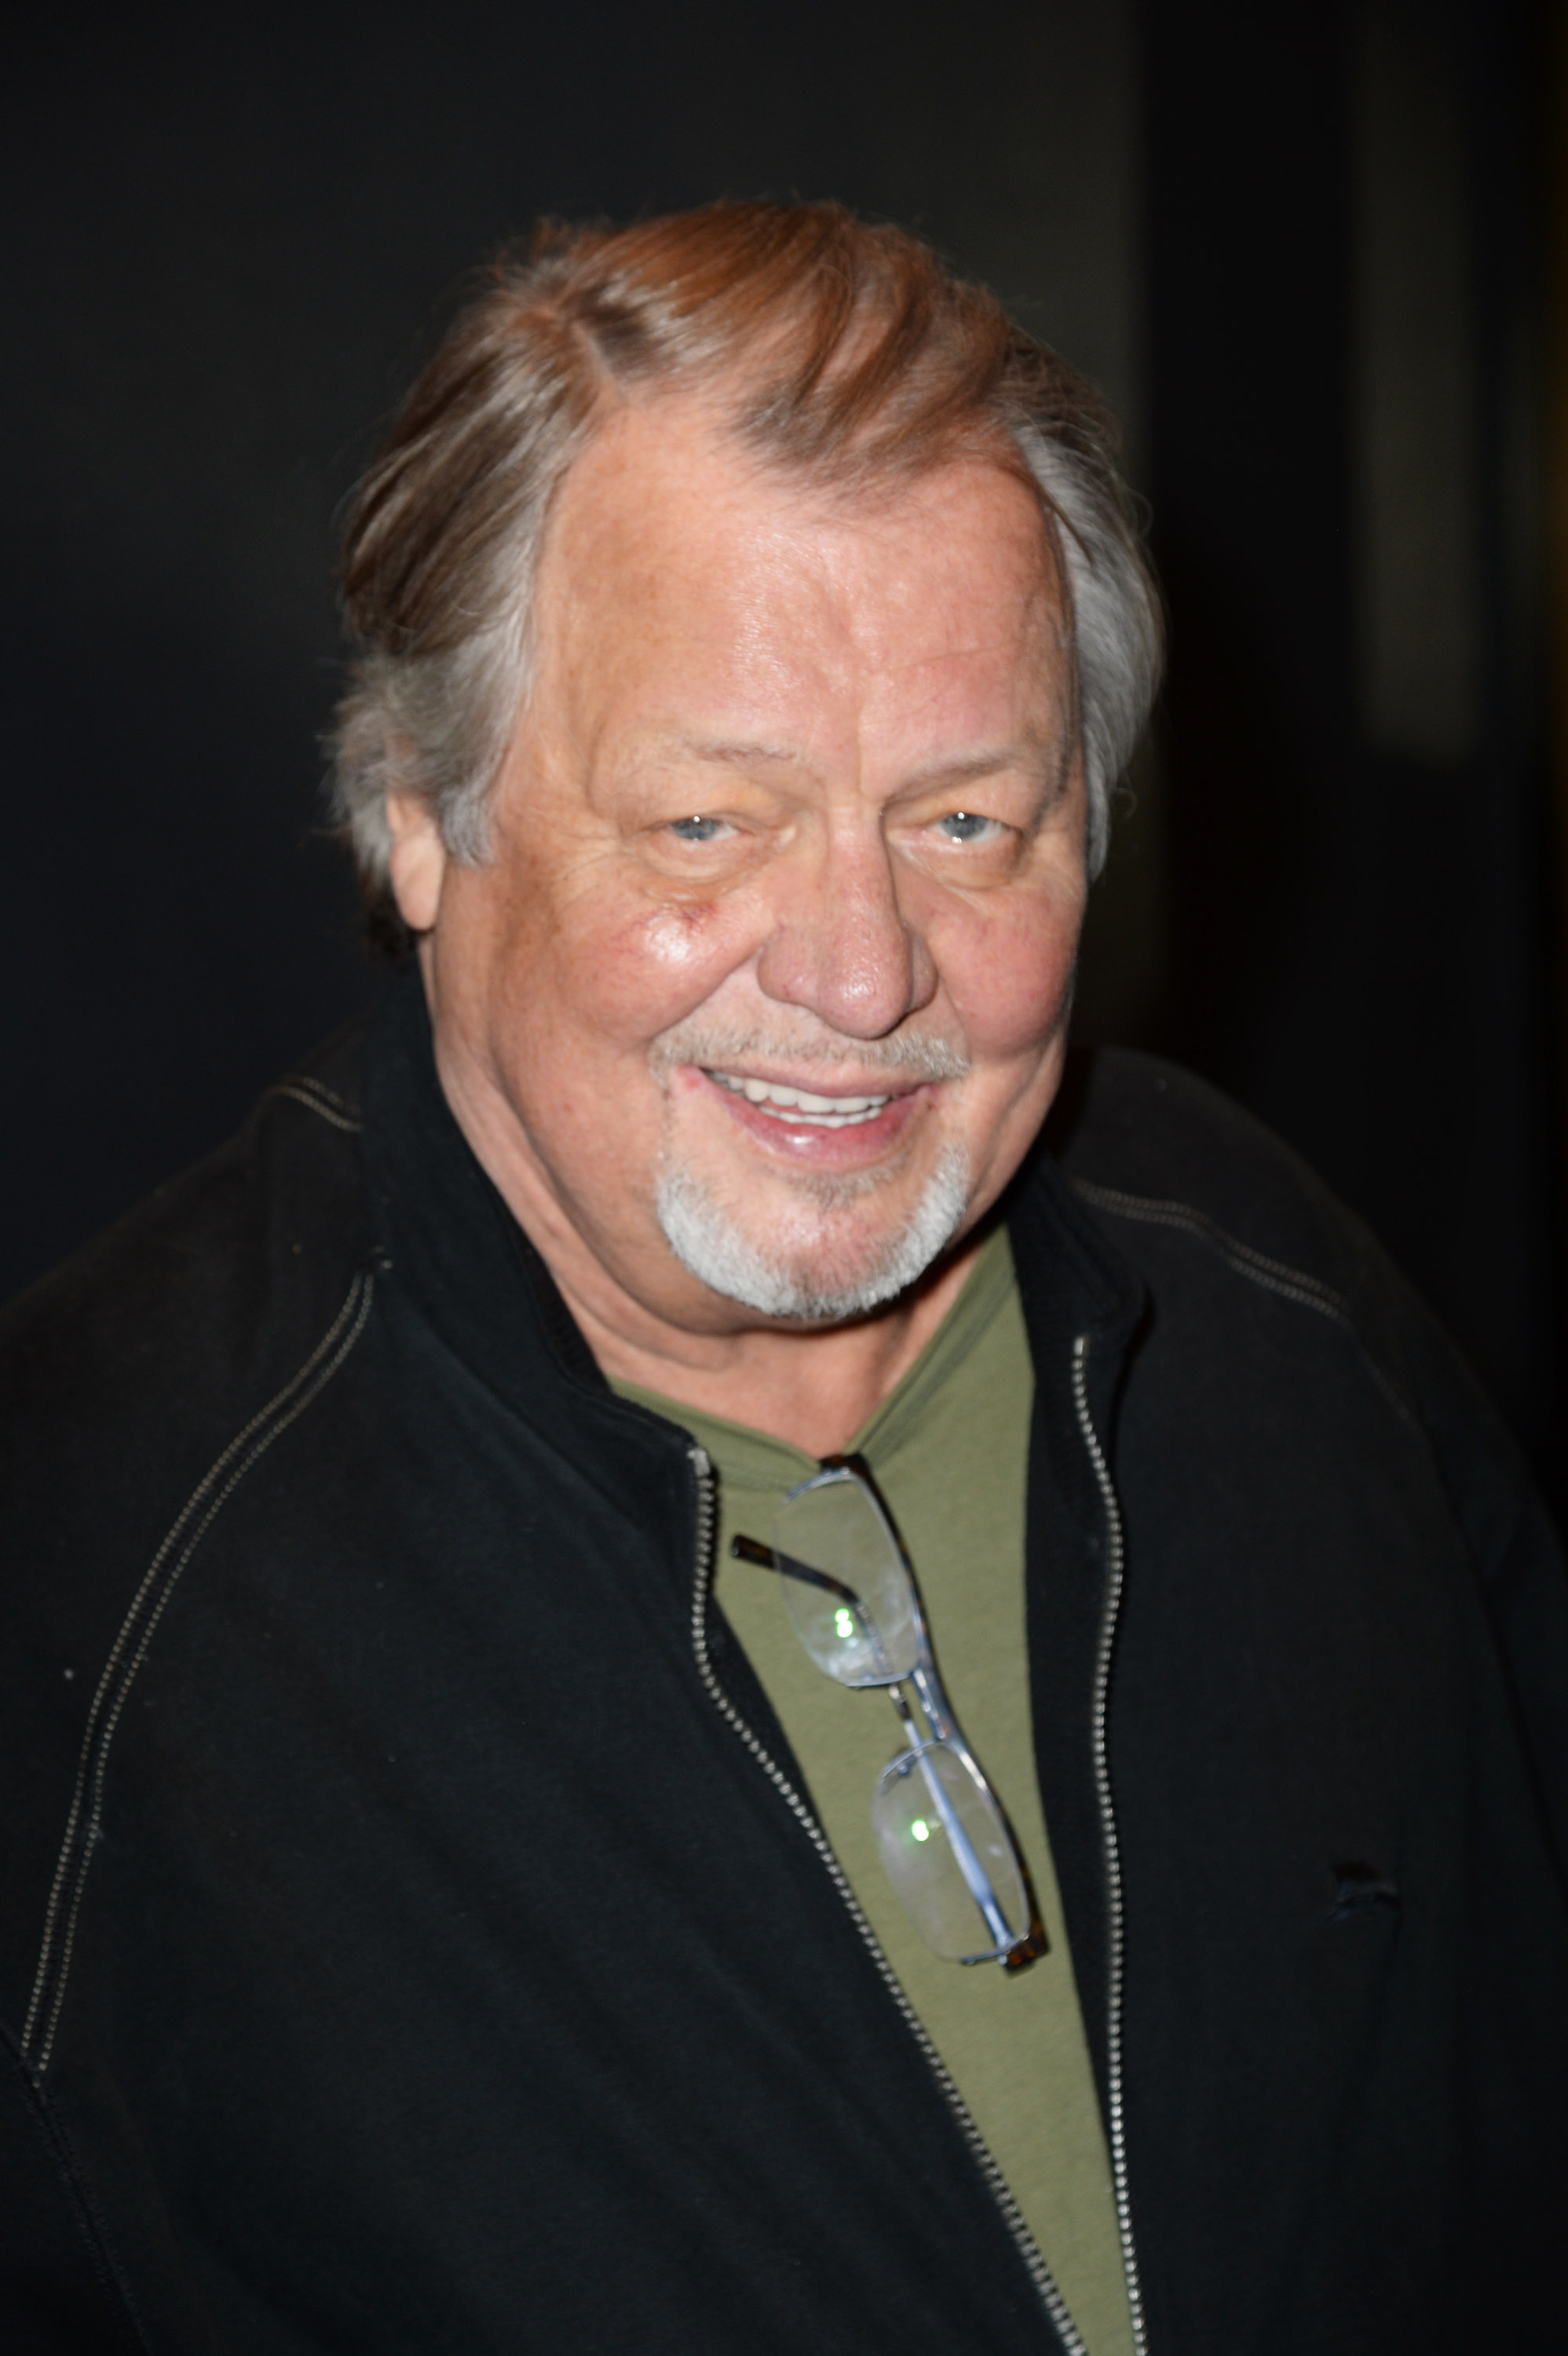 David Soul at The Empire Leicester Square on June 23, 2014 in London, England. | Source: Getty Images